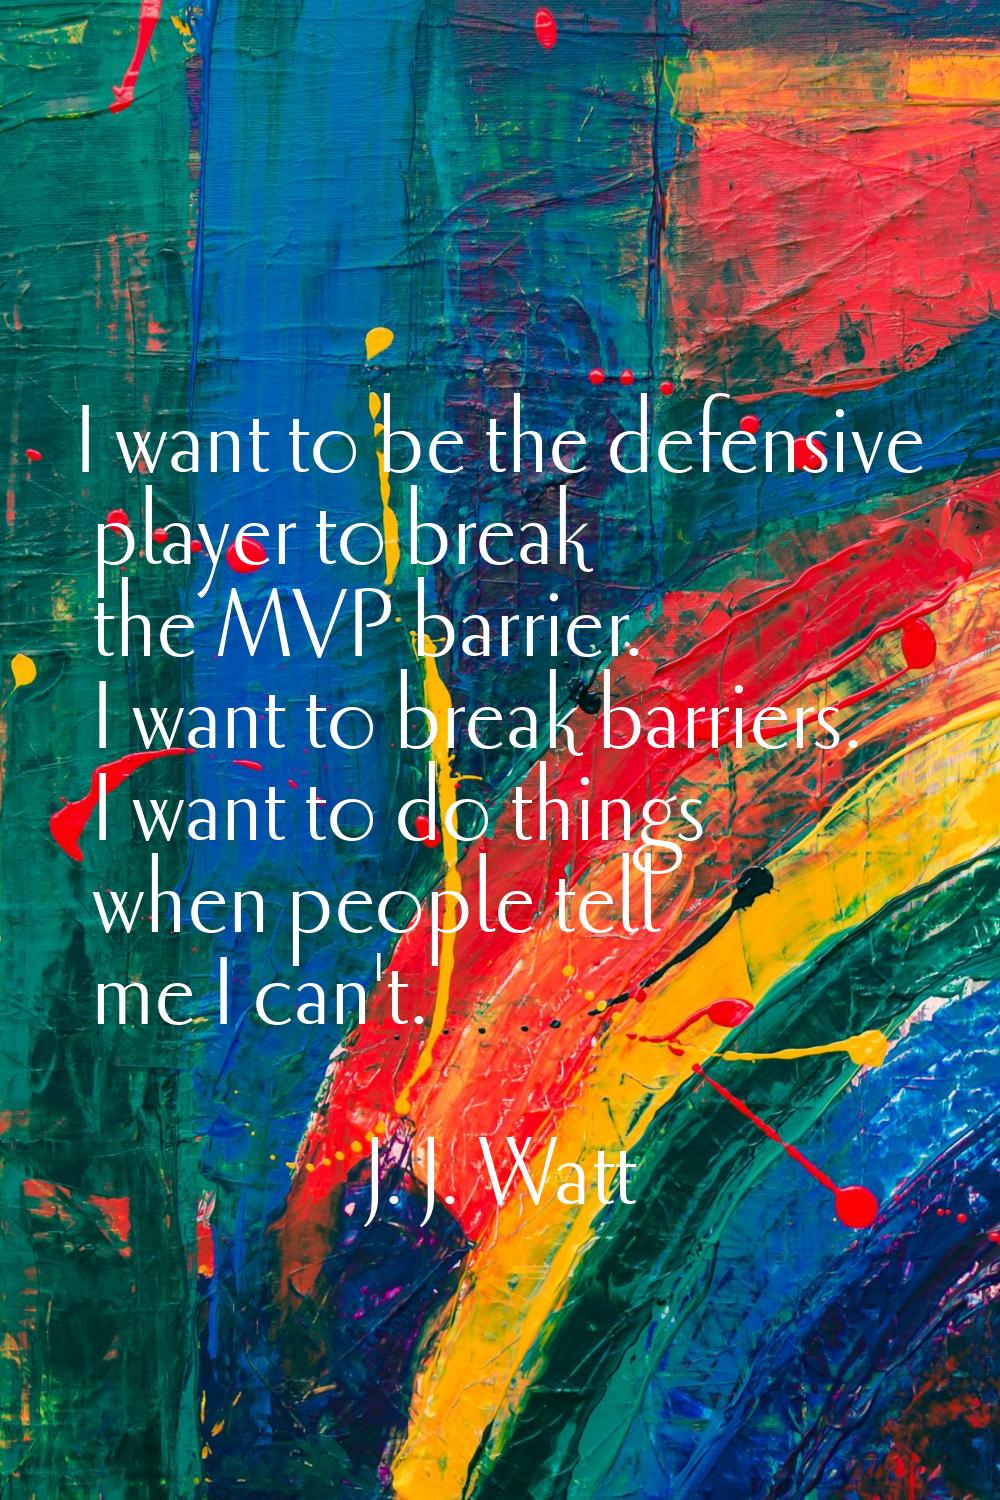 I want to be the defensive player to break the MVP barrier. I want to break barriers. I want to do 